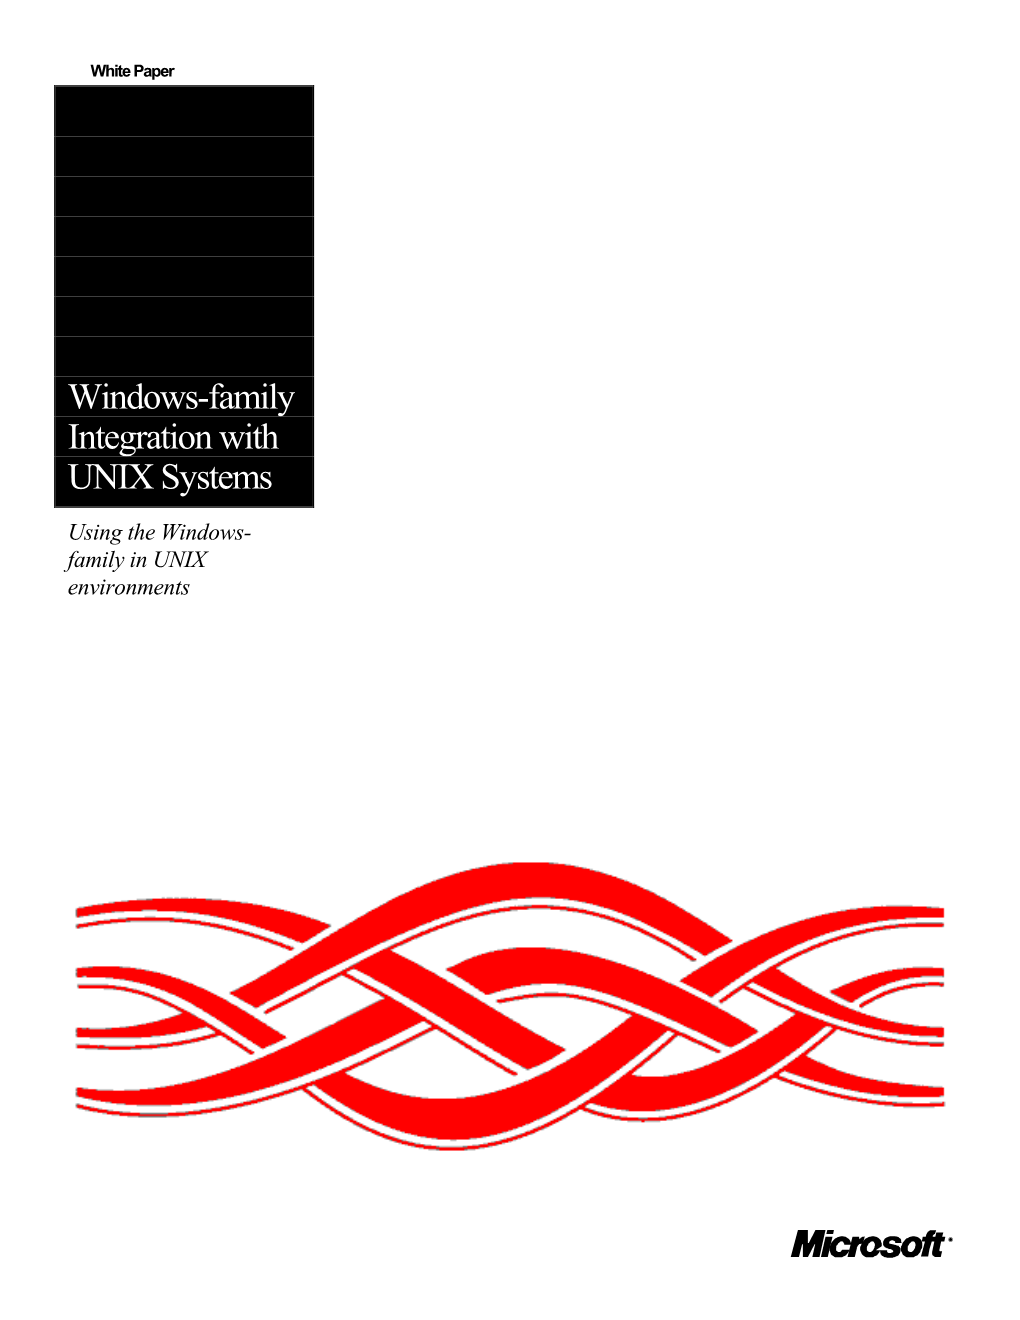 Windows-Familiy Integration with UNIX Systems